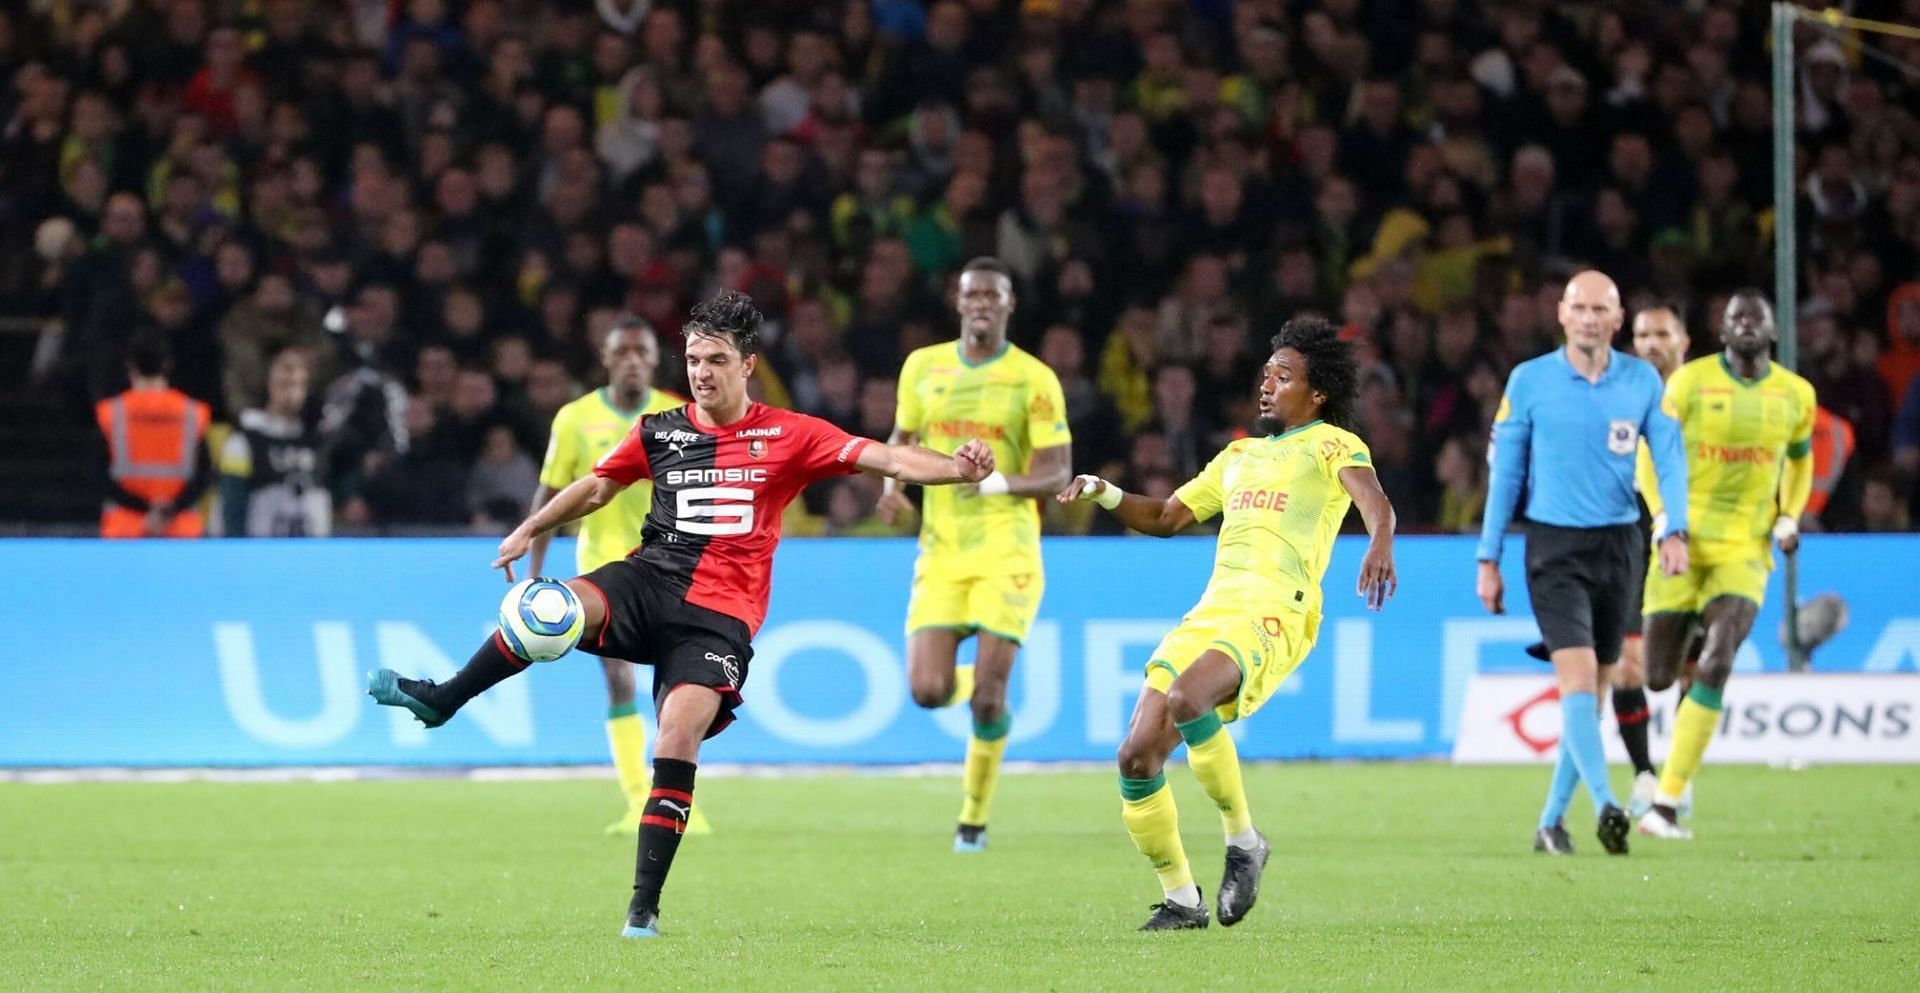 Nantes and Rennes square off in a Ligue 1 fixture on Wednesday